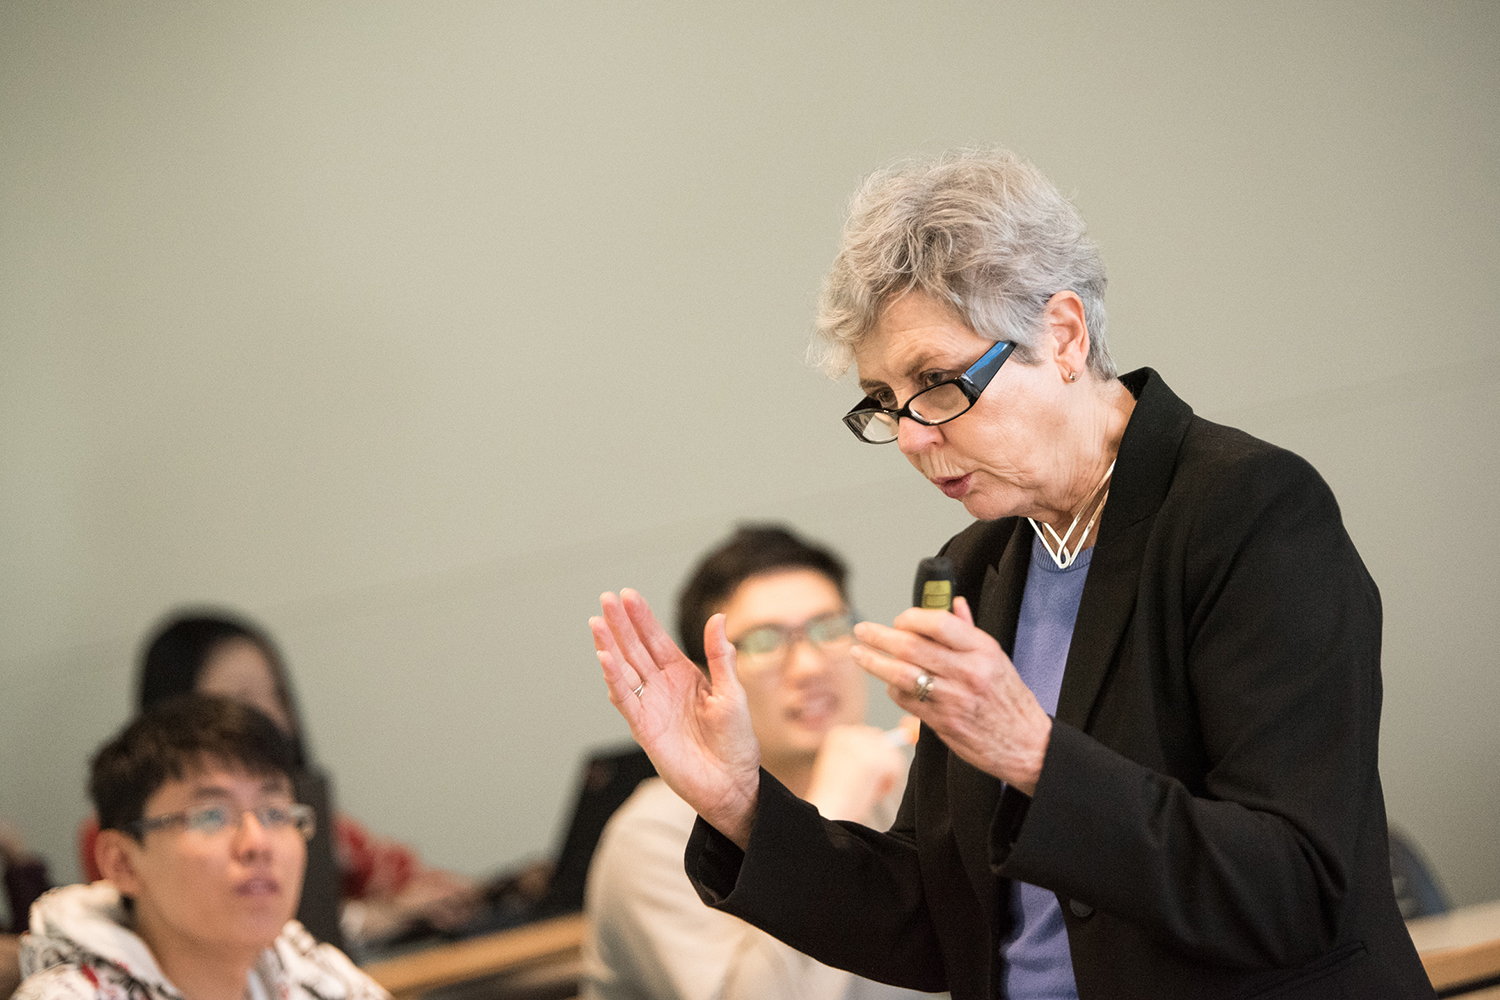 Susan Spiggle (above), professor emeritus in marketing, delivers a presentation entitled "Principles of Writing for Clarity" during the Fall '18 semester. (Nathan Oldham / UConn School of Business)